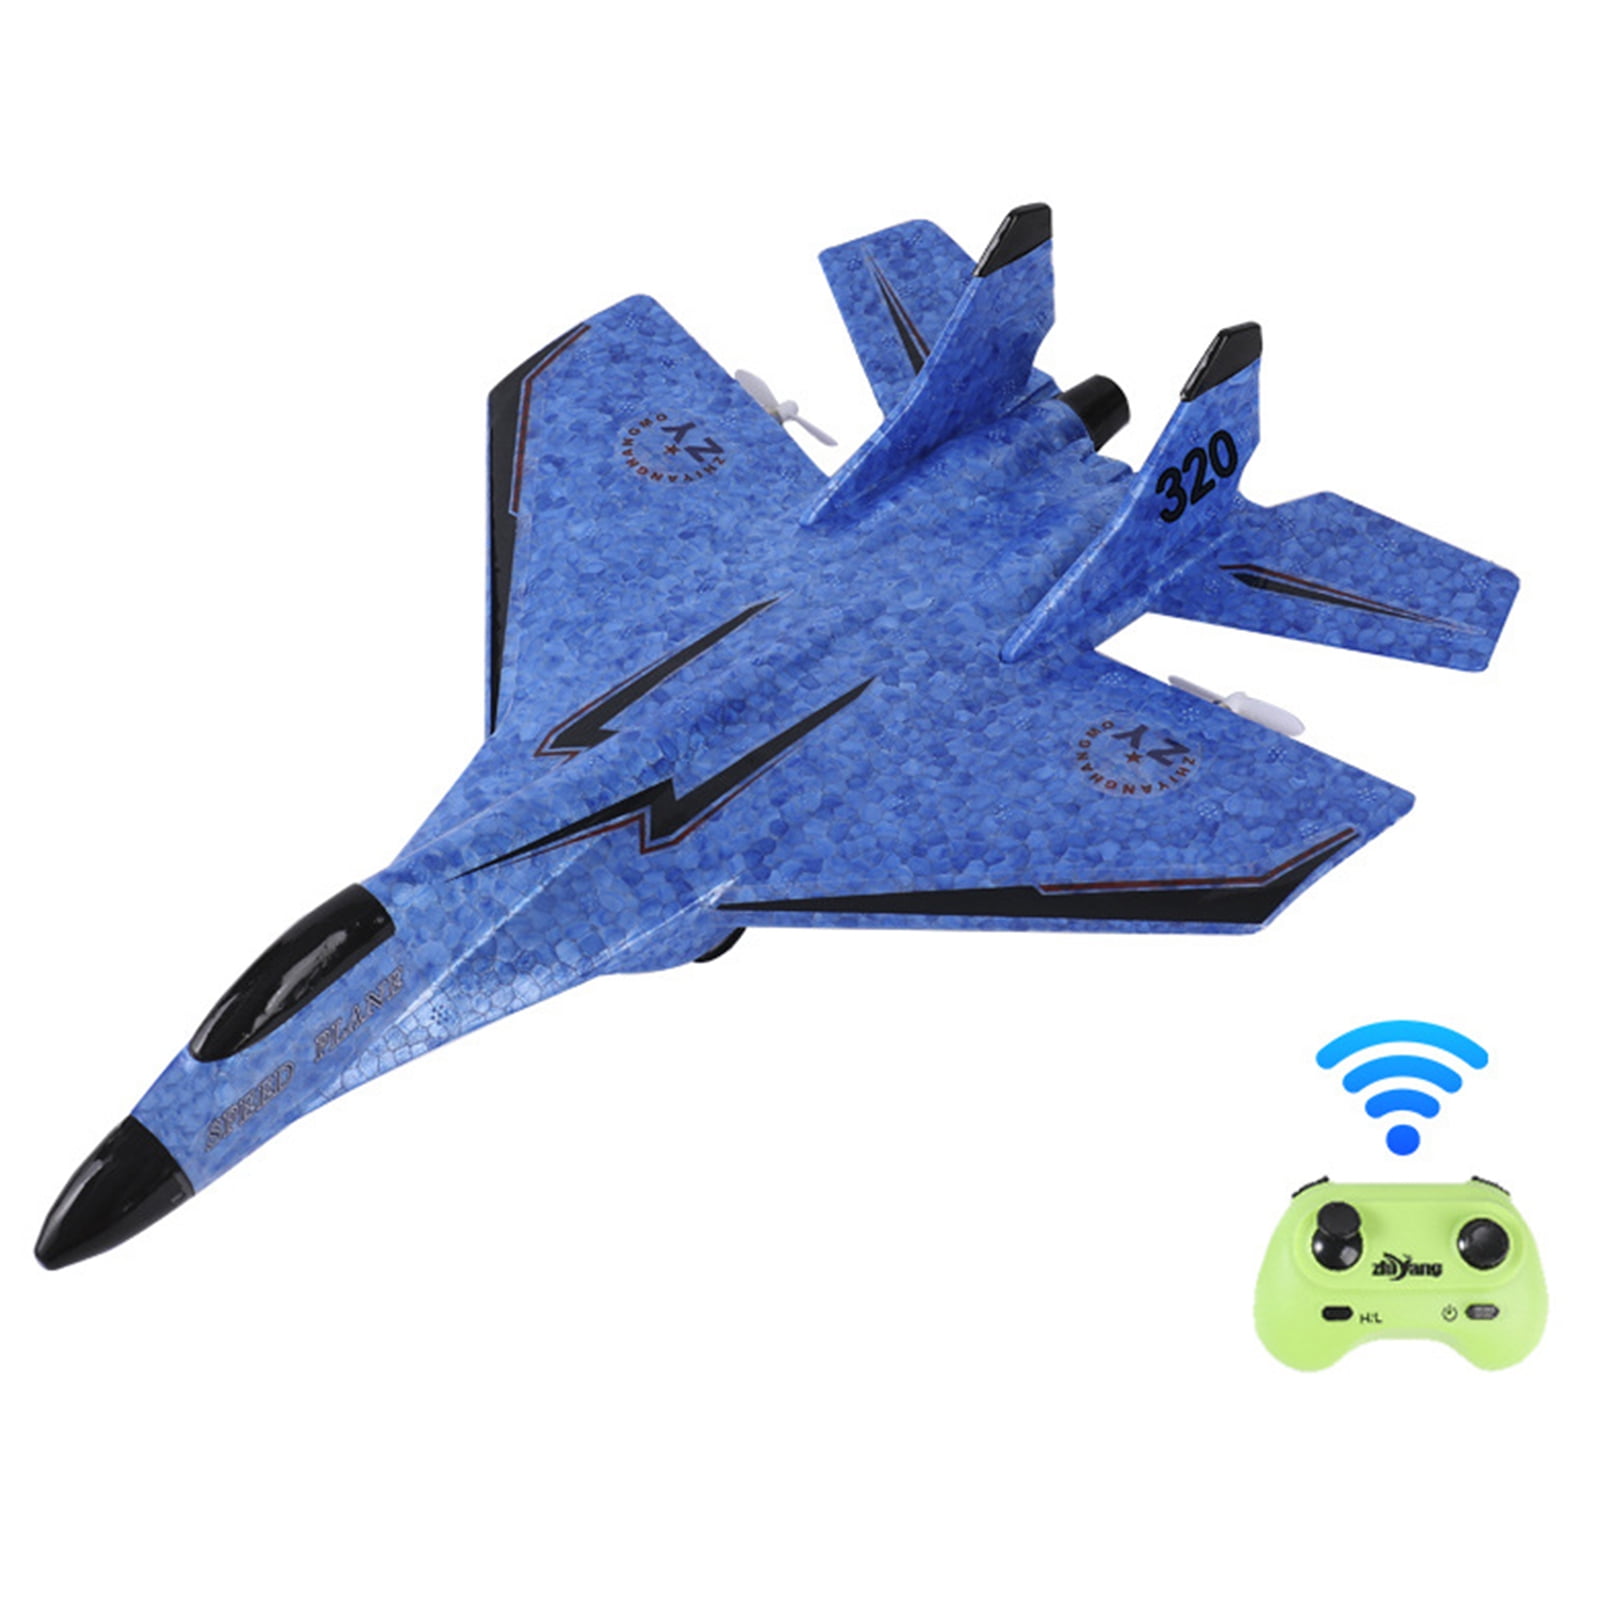 2.4G RC Helicopter Remote Control Plane Glider Airplane Durable EPP Foam Toy F1 